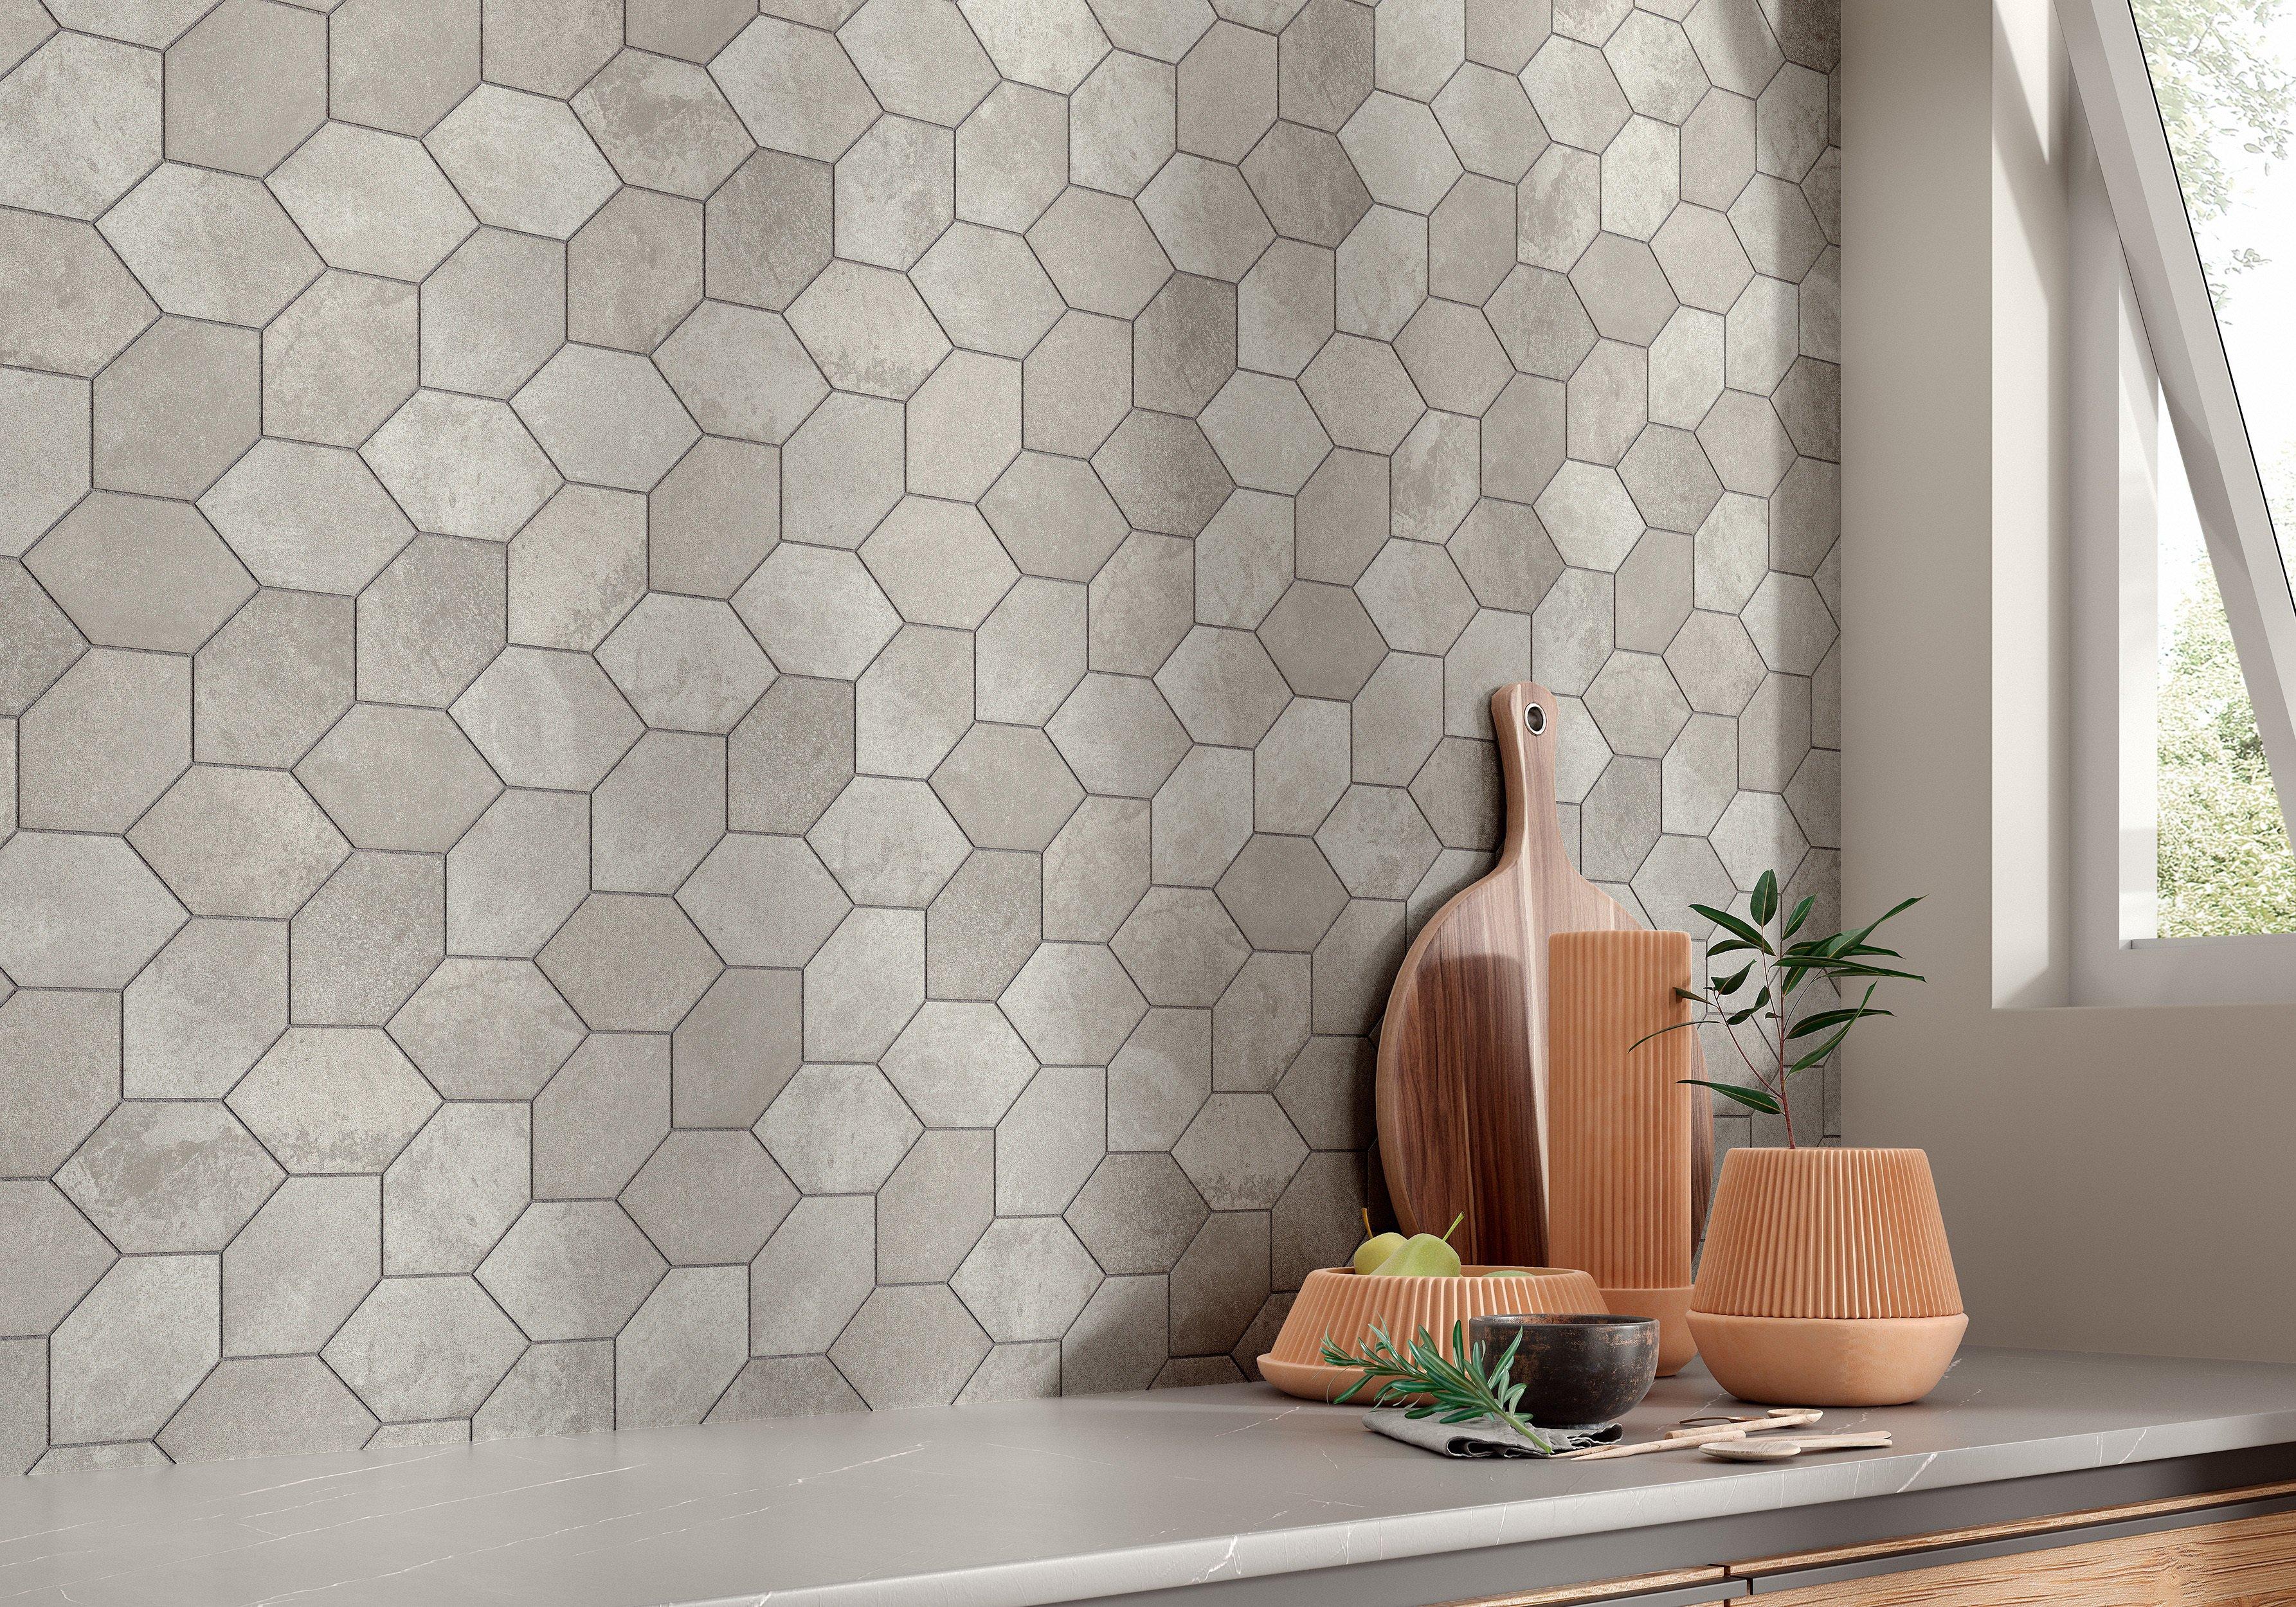 District Gray 13 in. Leaf Porcelain Mosaic